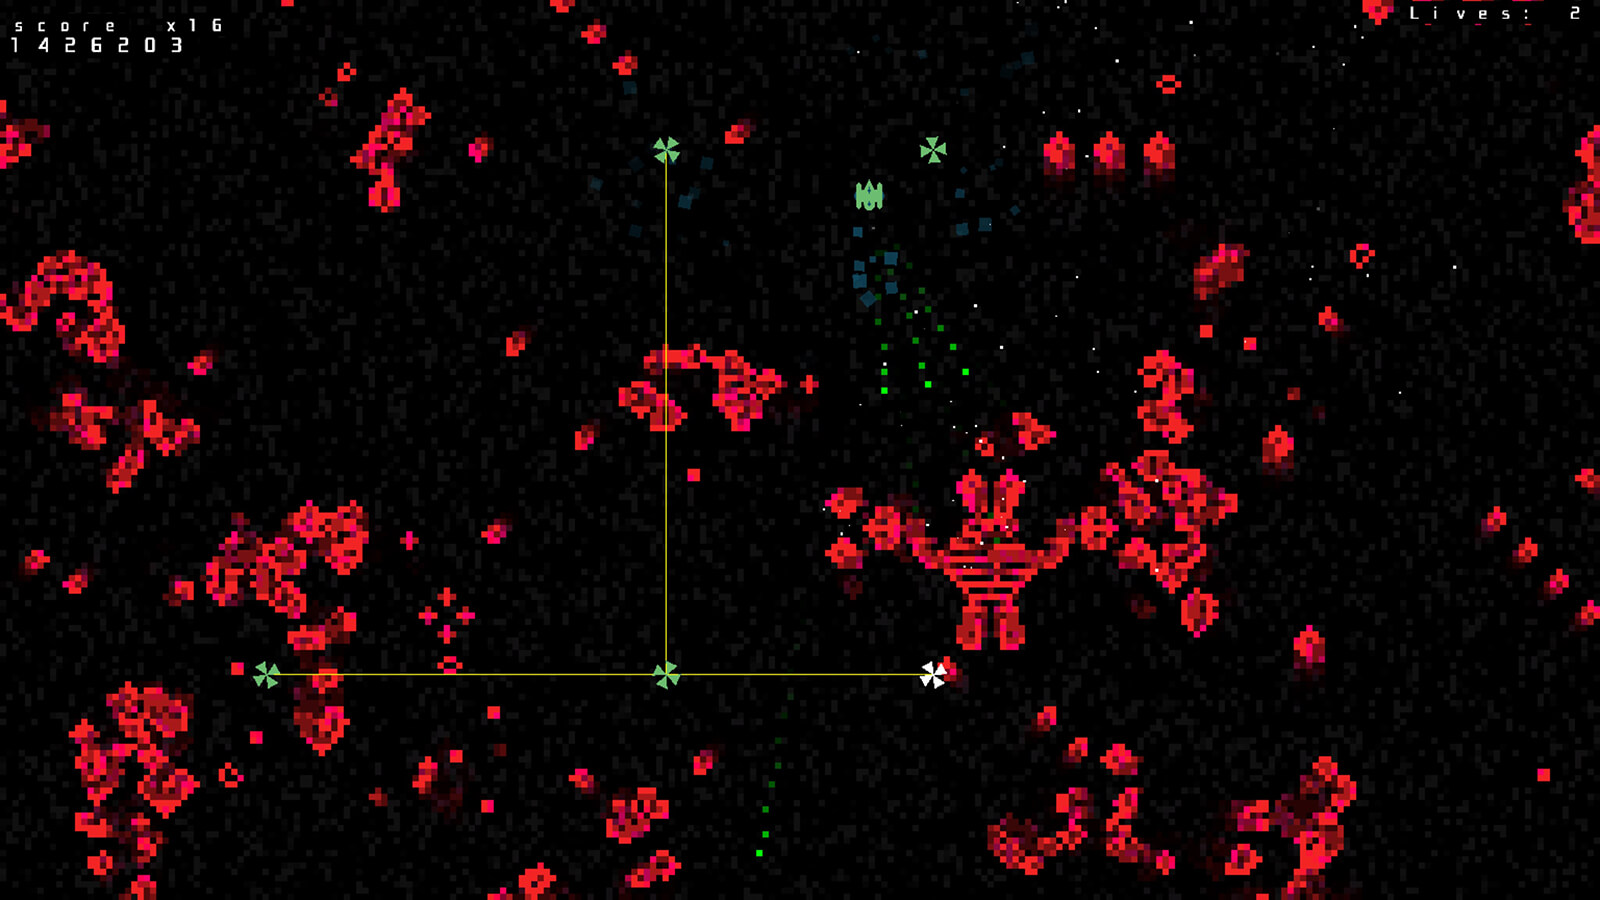 A spaceship fires projectiles at clusters of pixellated enemies moving all over the playfield.